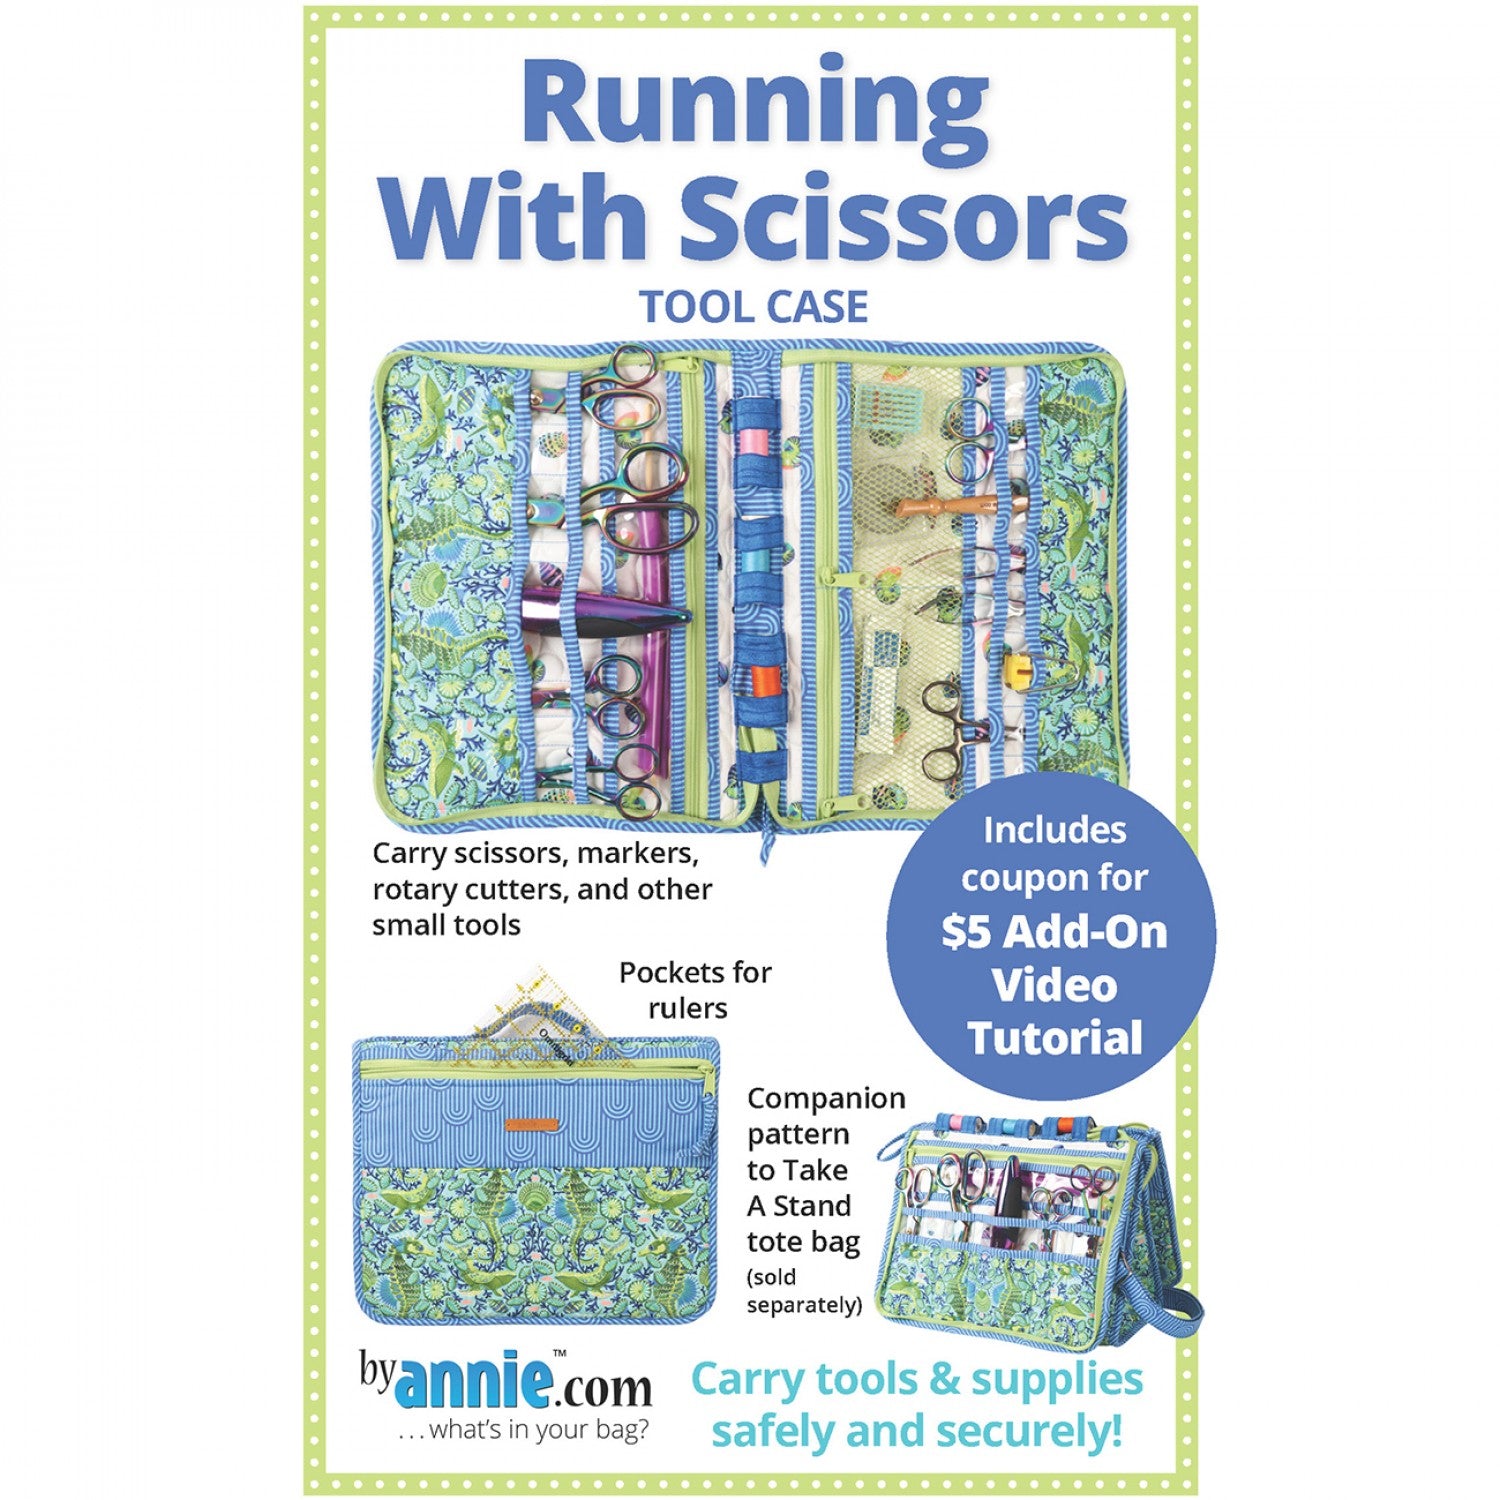 Running With Scissors Tool Case Sewing Pattern by Annie Unrein for ByAnnie